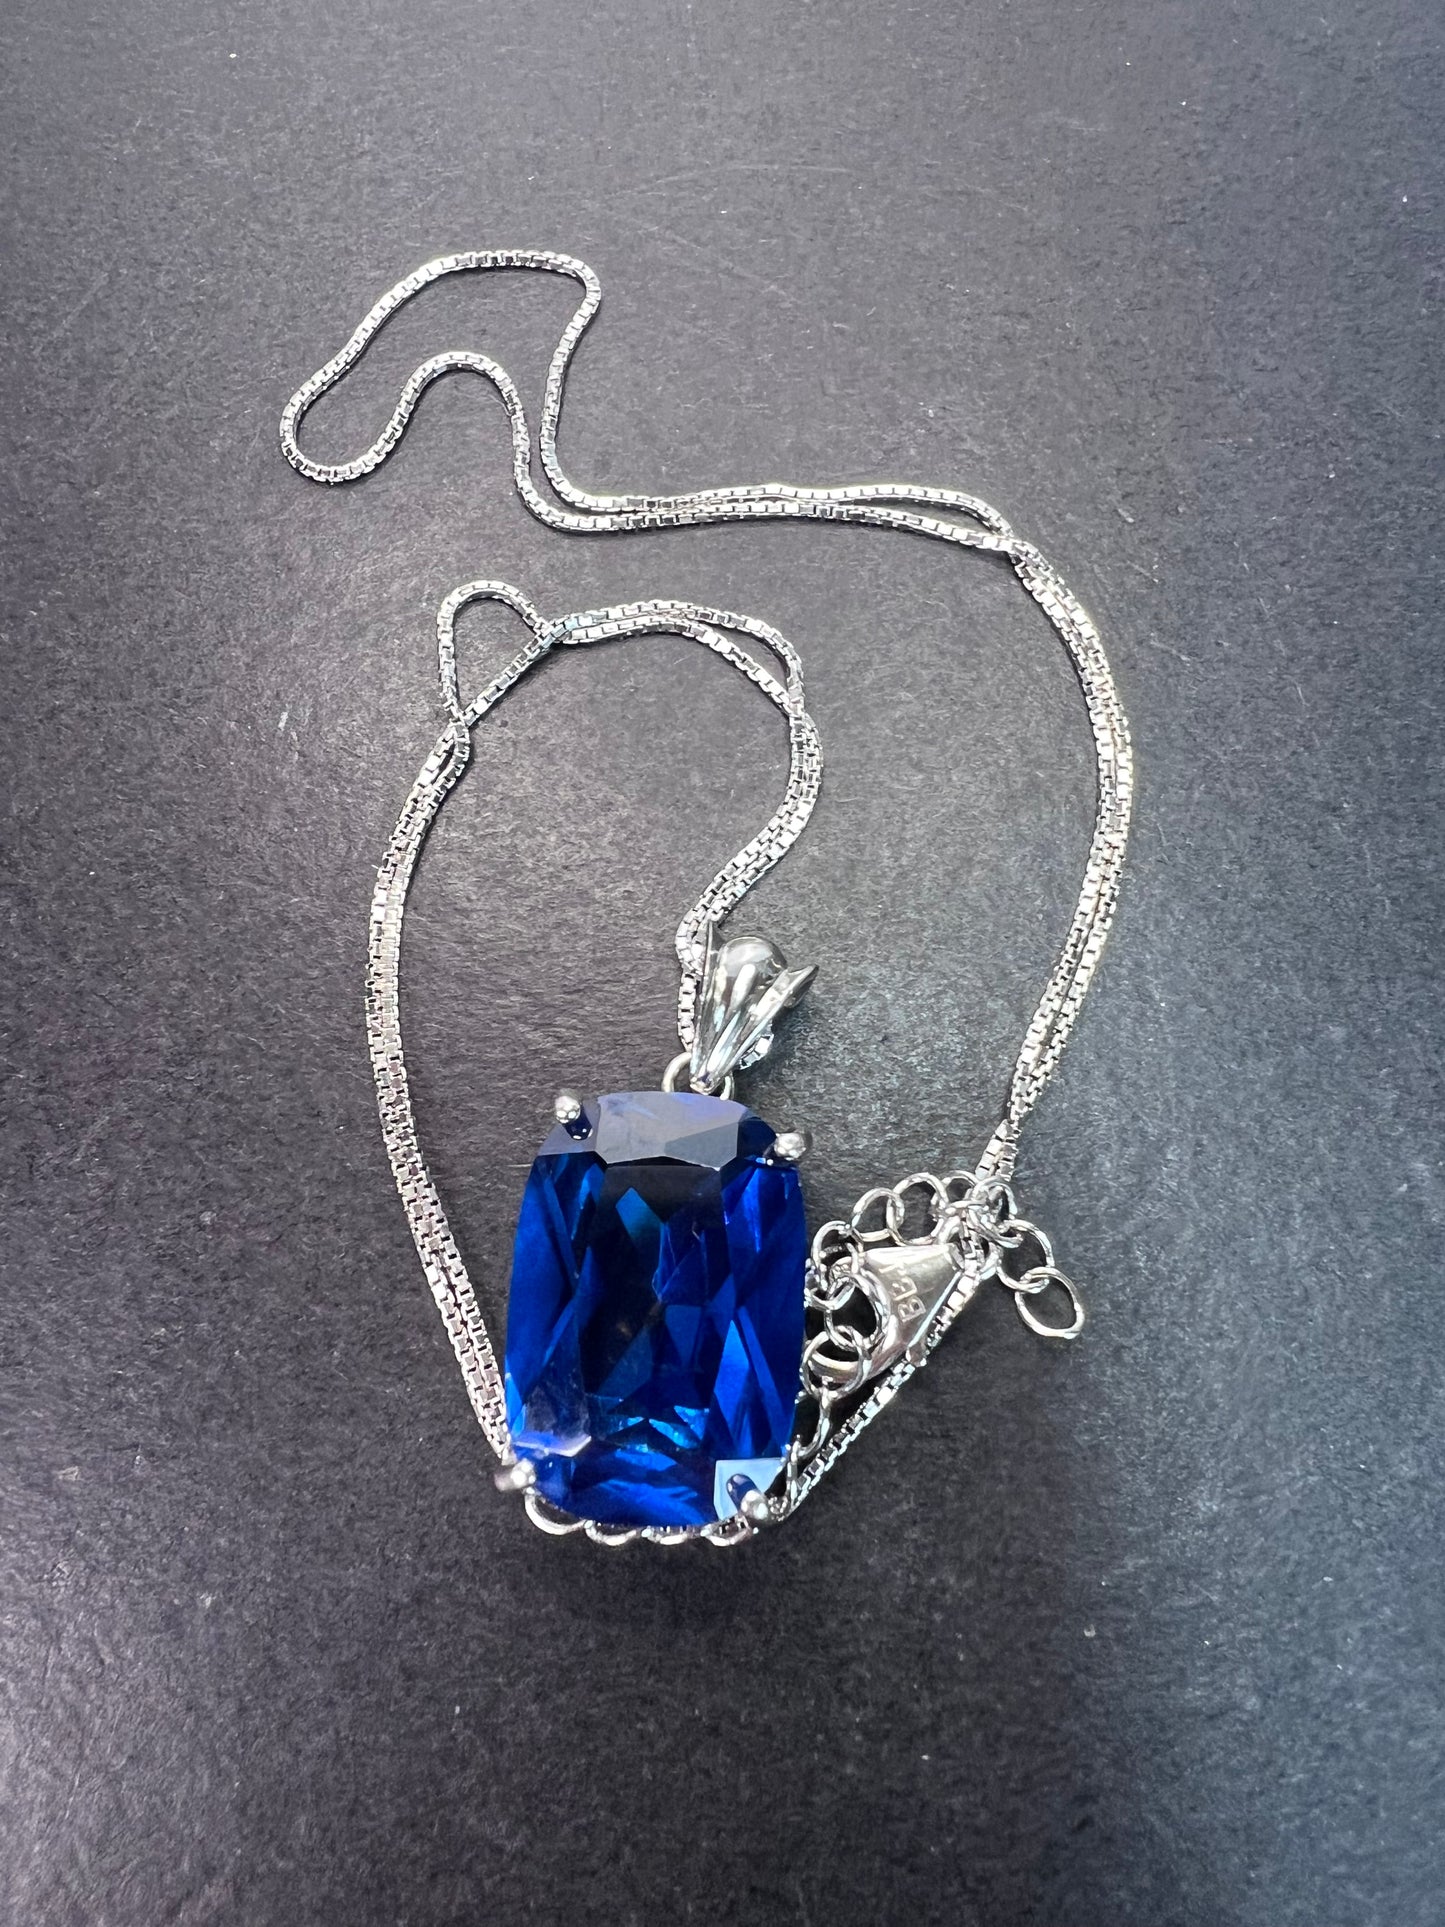 Blue lab spinel sterling silver pendant and 18 inch chain necklace